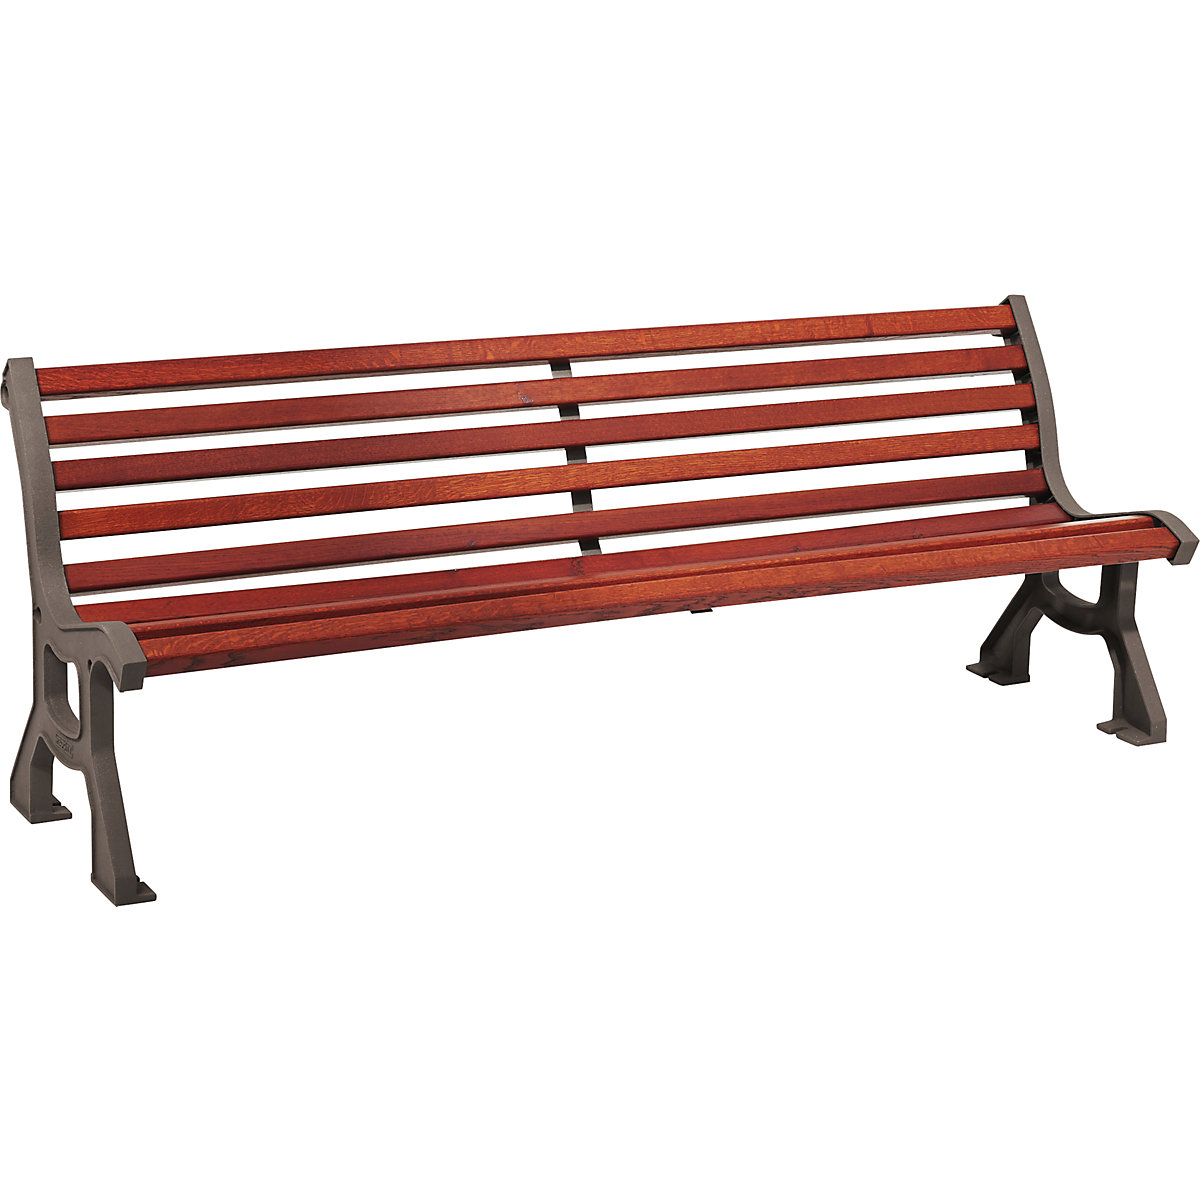 LUBLIN wooden bench - PROCITY